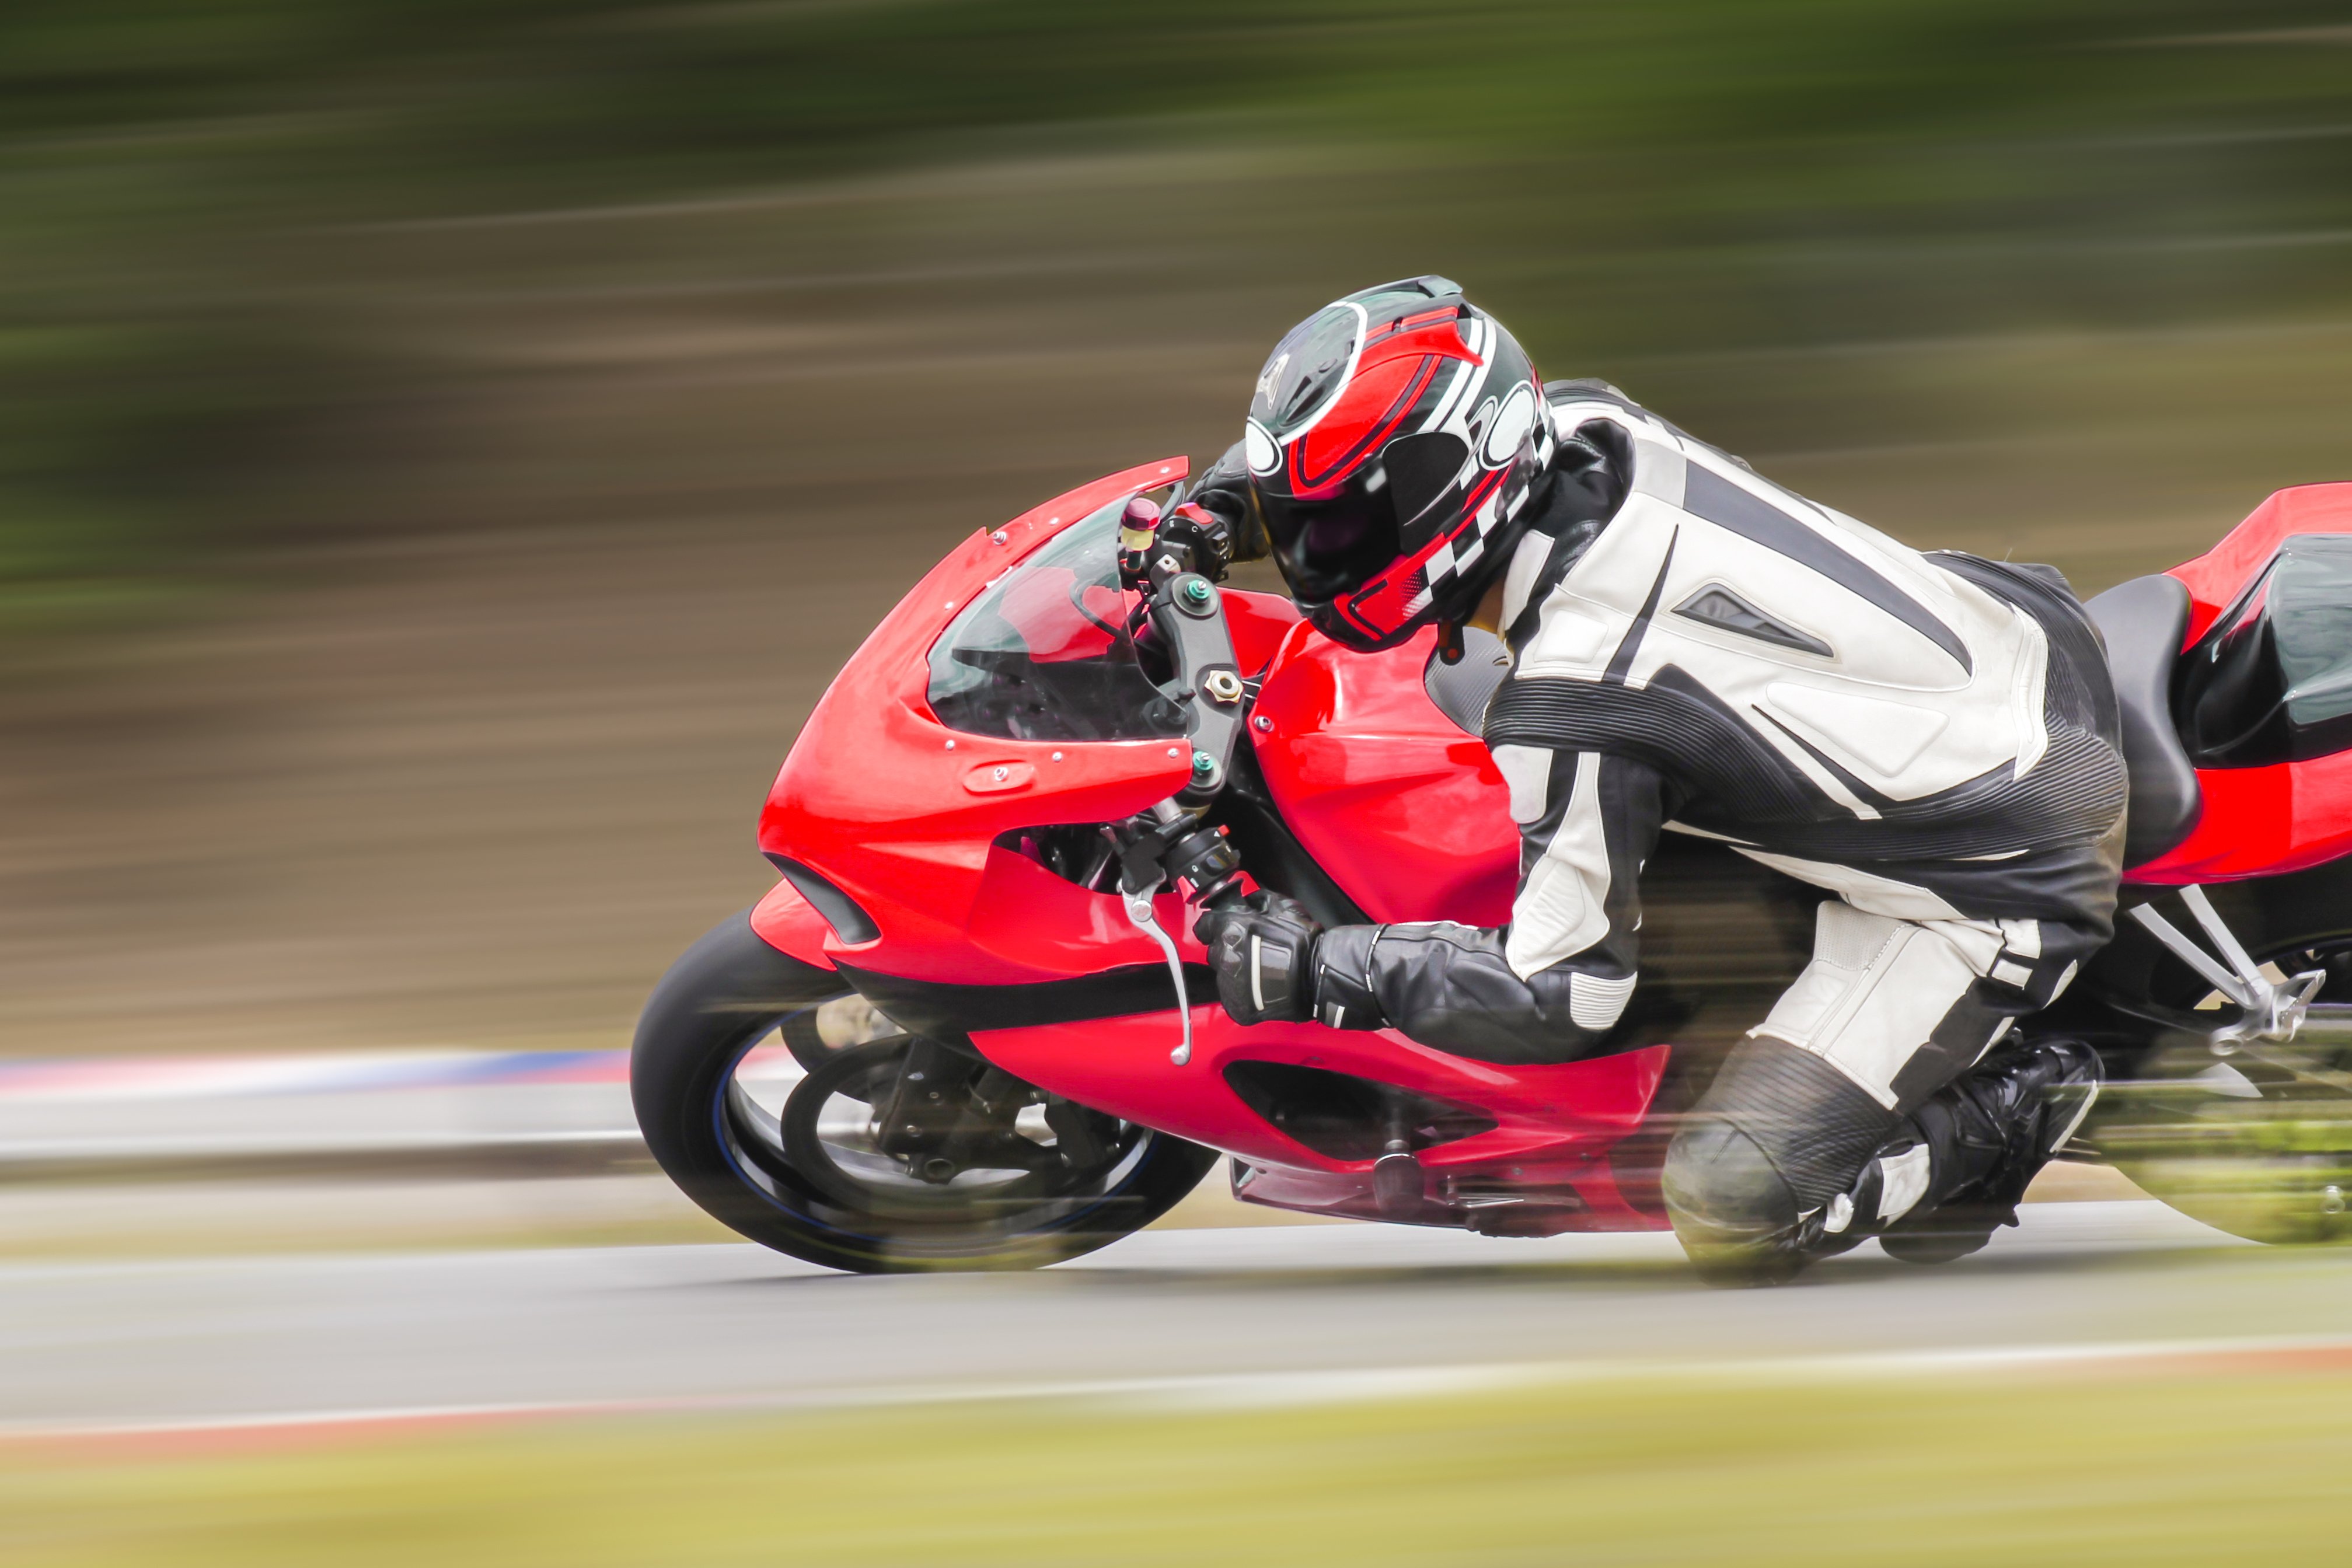 A leading motorcycle racer on the racetrack. | Photo: shutterstock